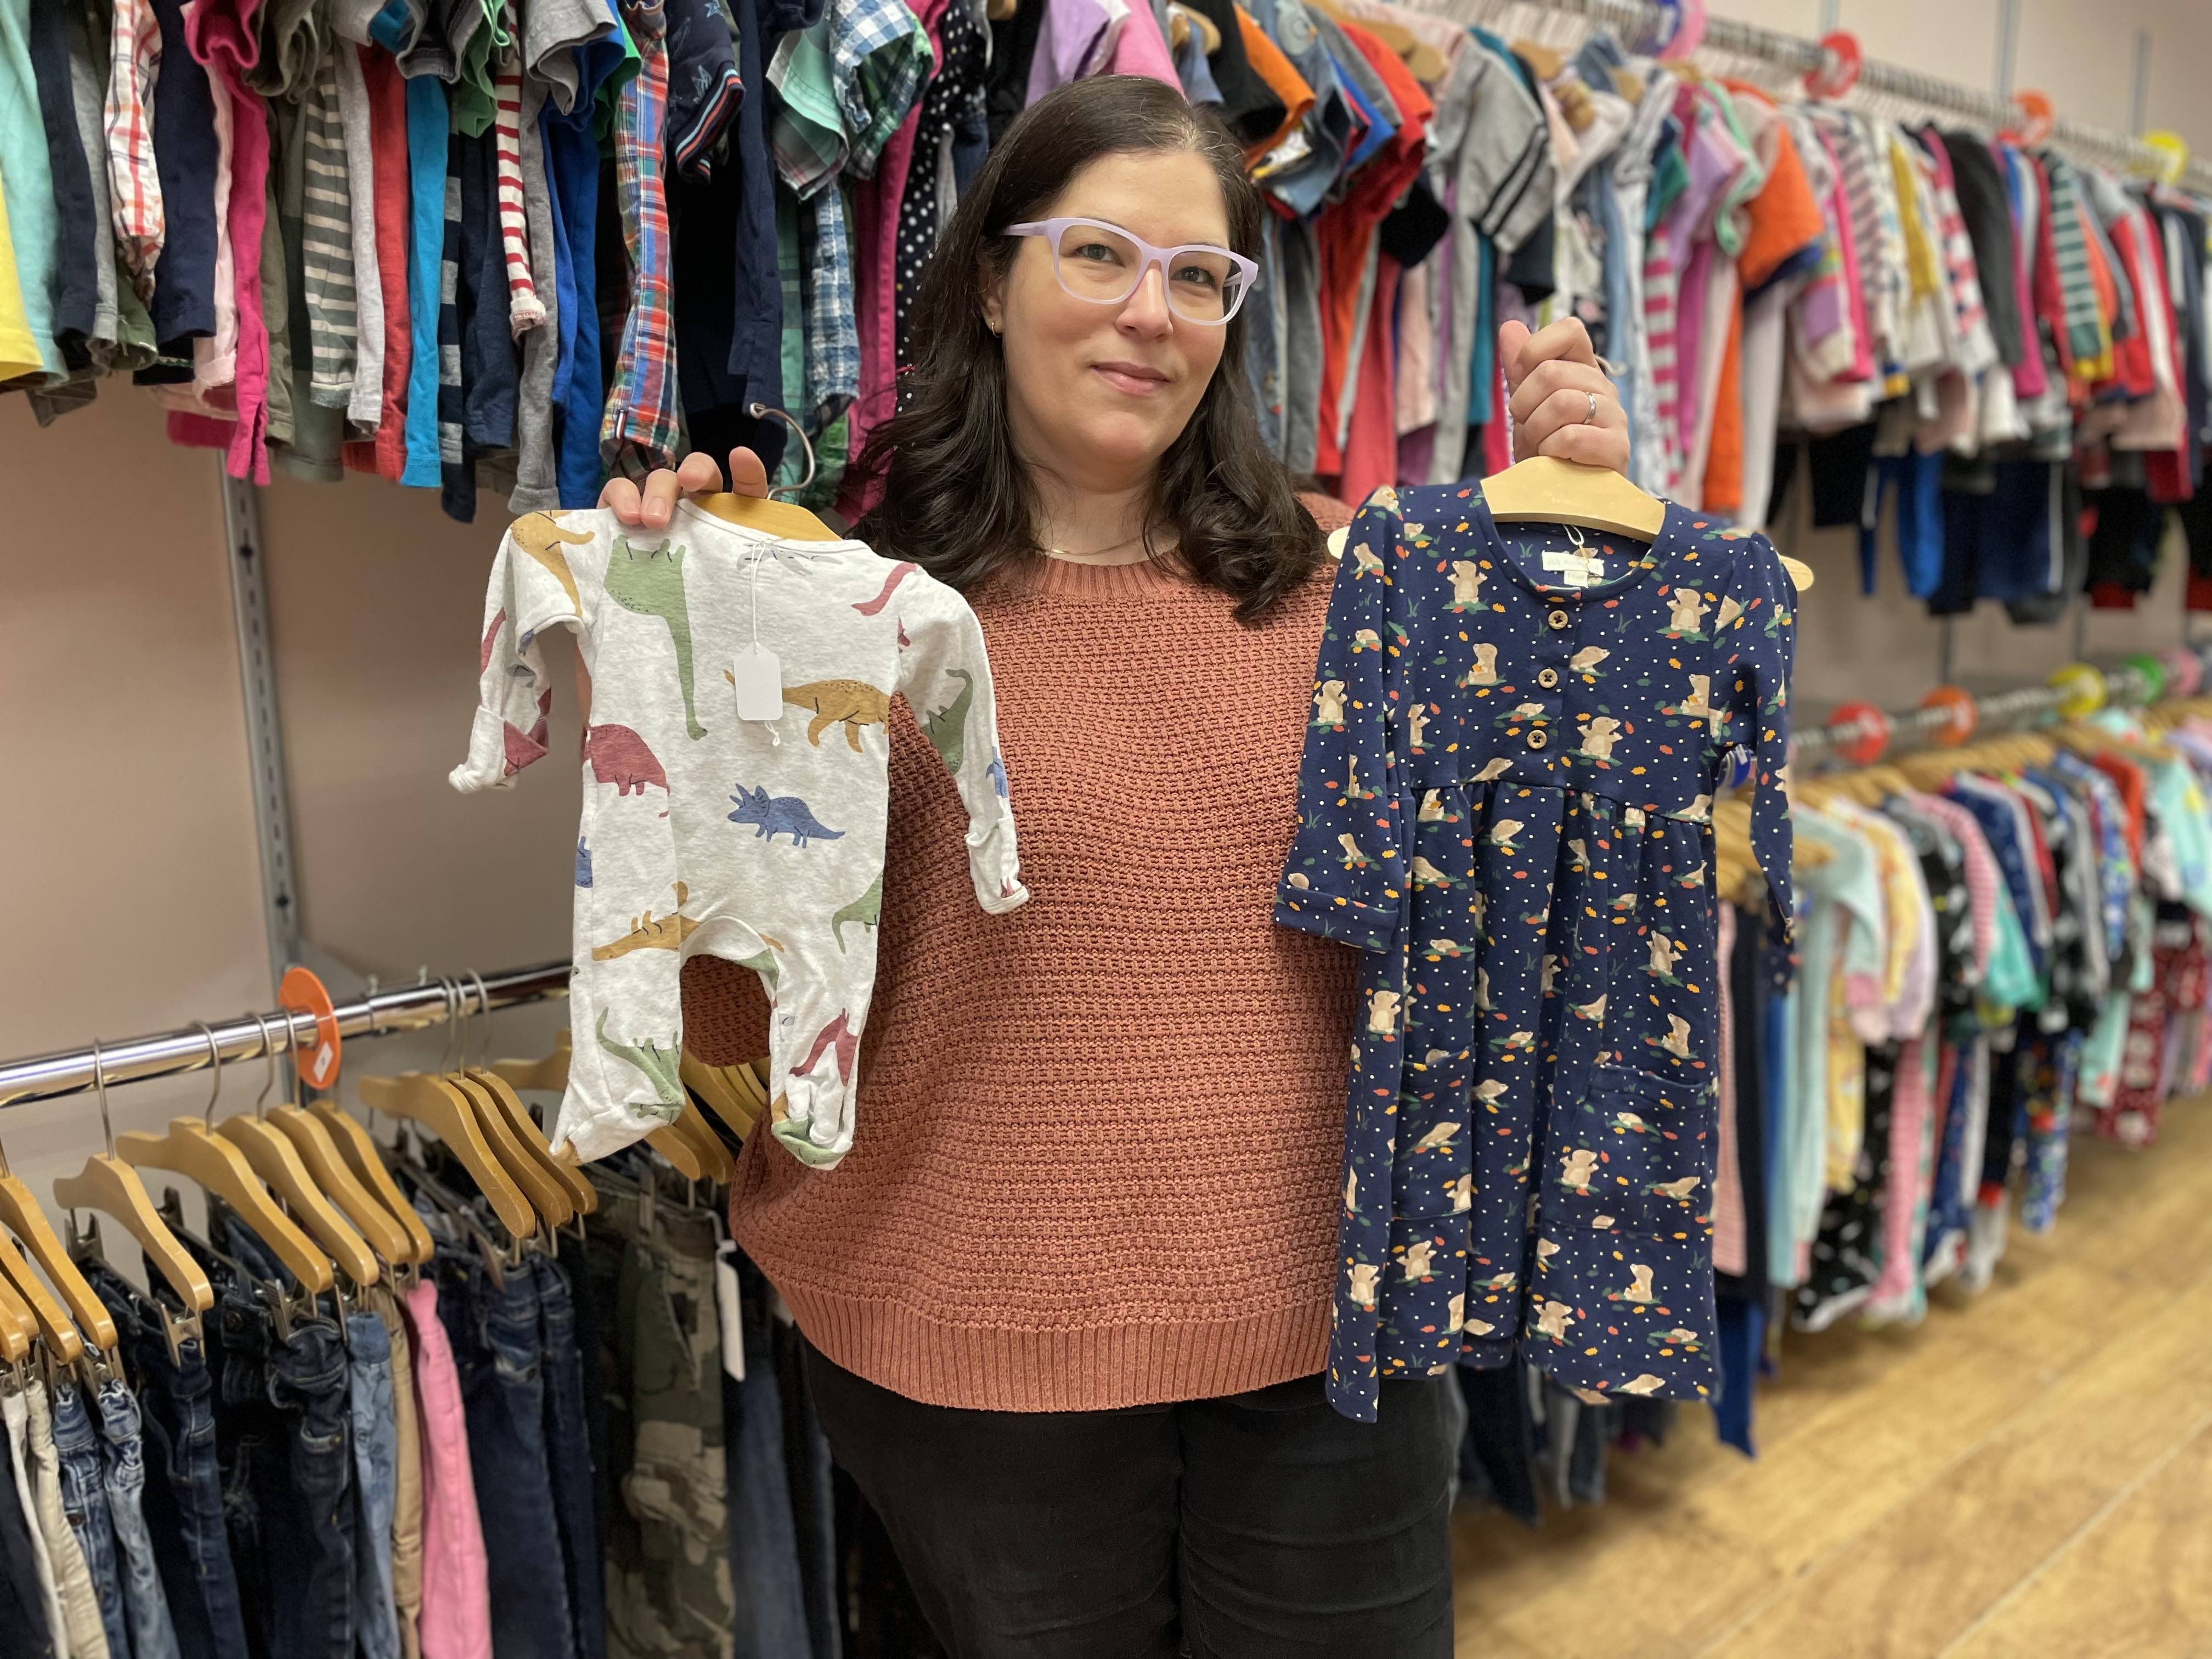 Much-needed' gently used kids' clothing store opens downtown